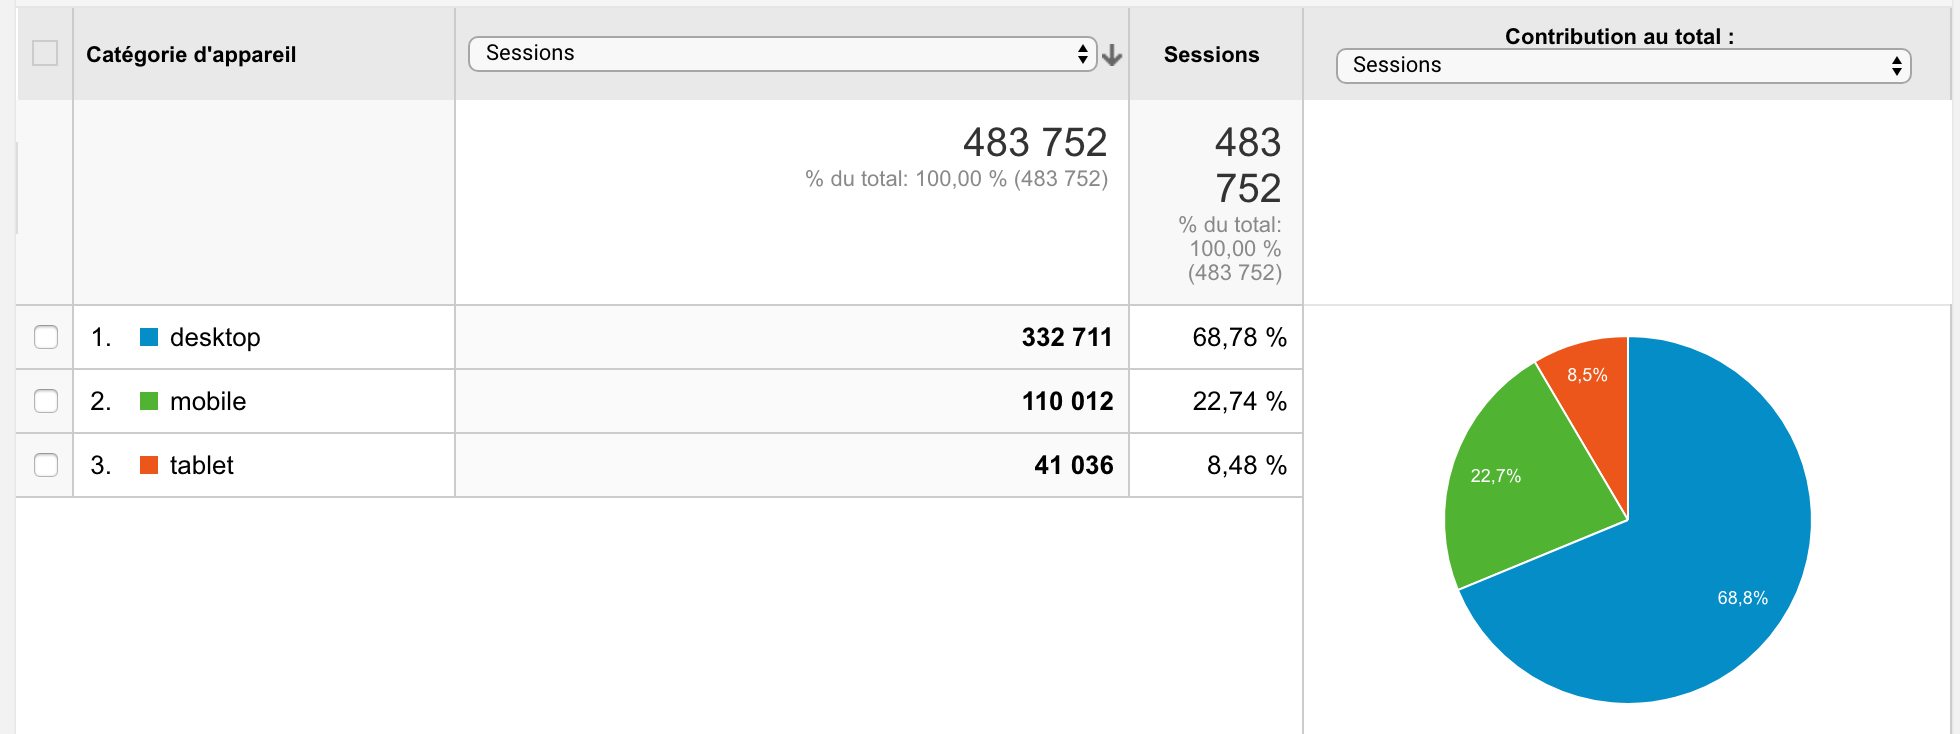 google analytics : mobile users share is 30%